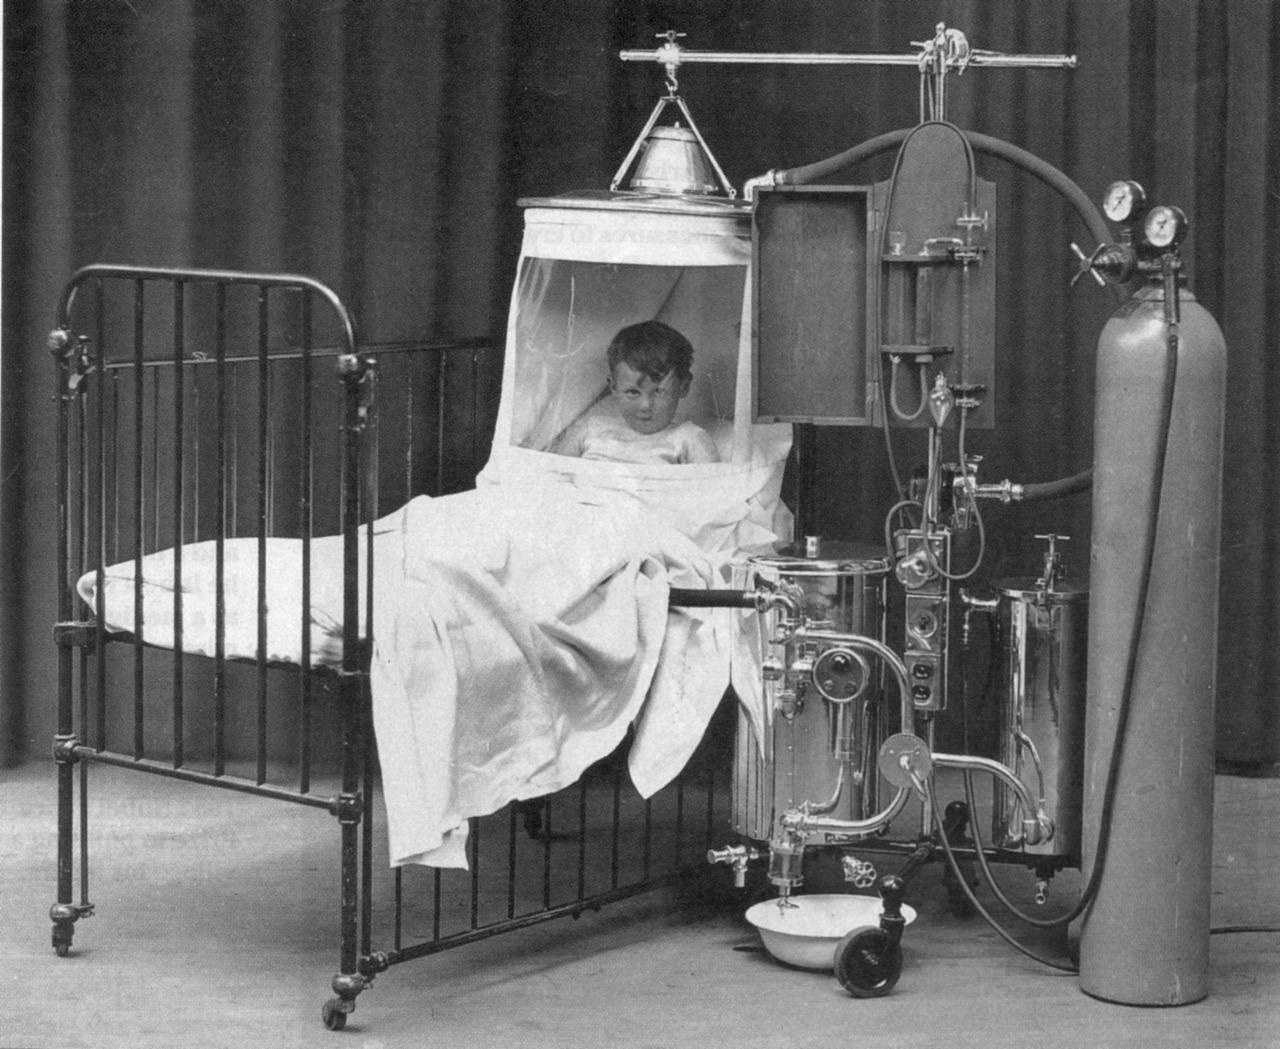 A kid in an oxygen apparatus in the US in 1930. Zoom in on the kid.